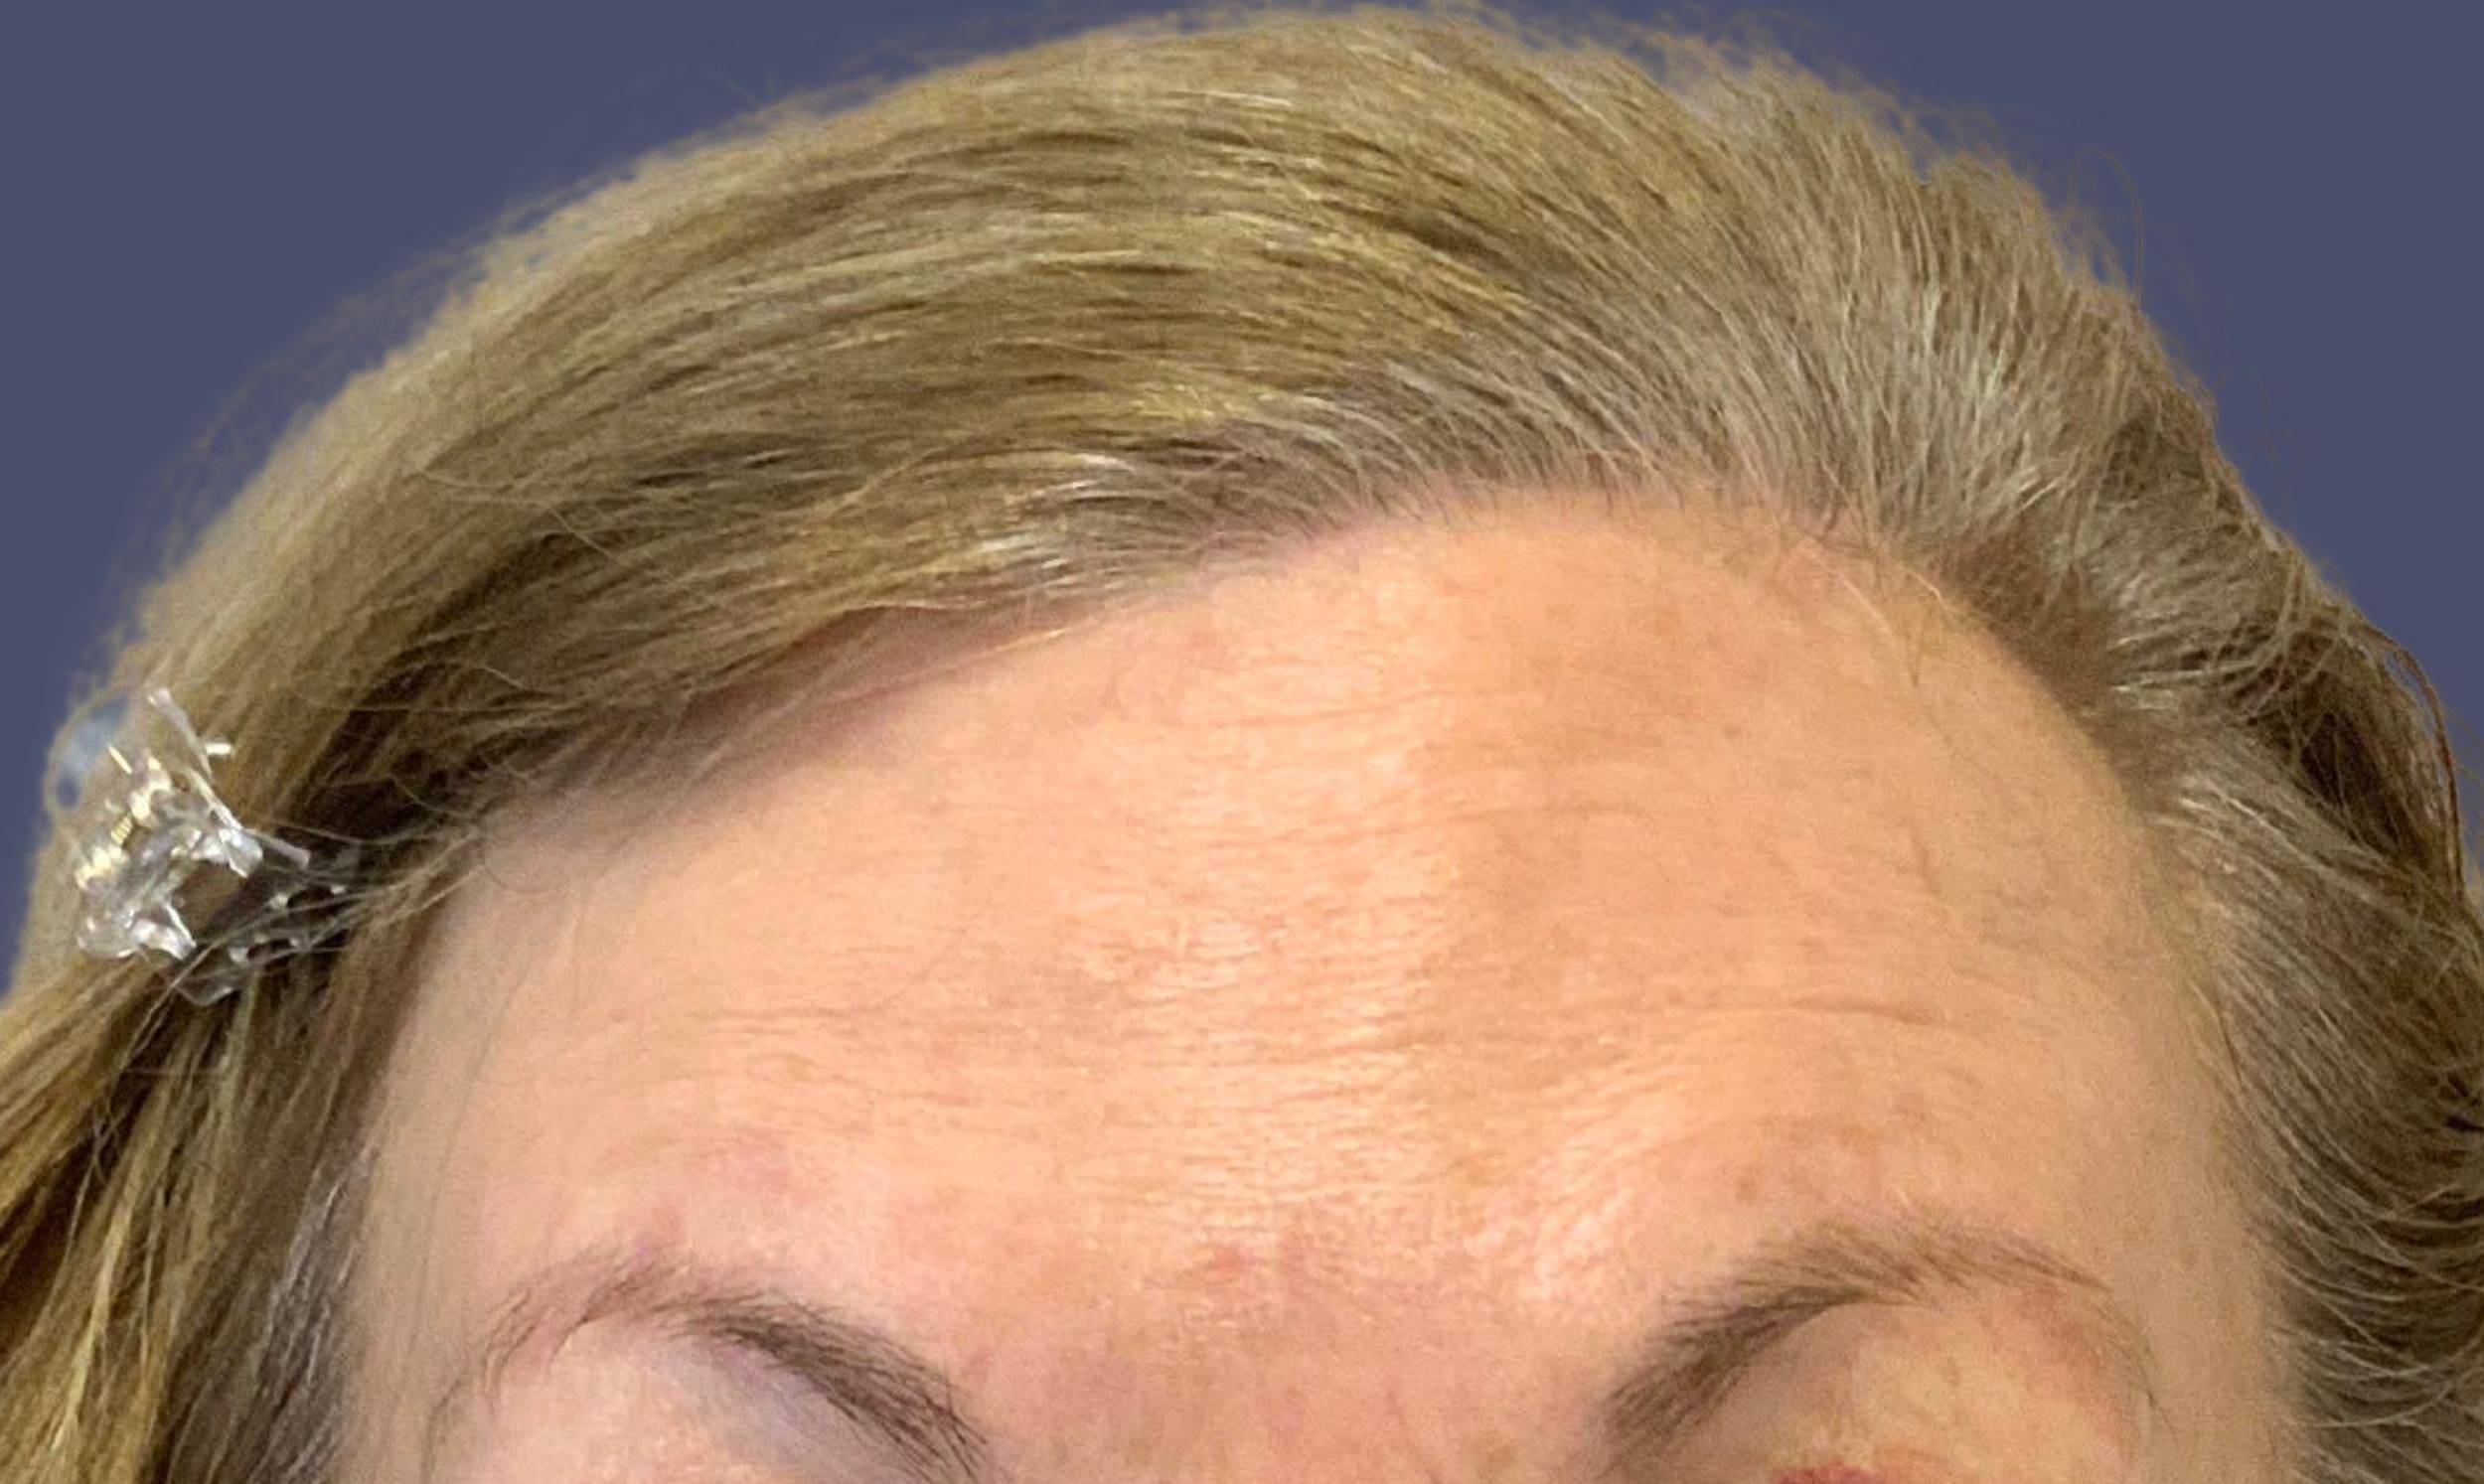 Tox 7 - Botox After